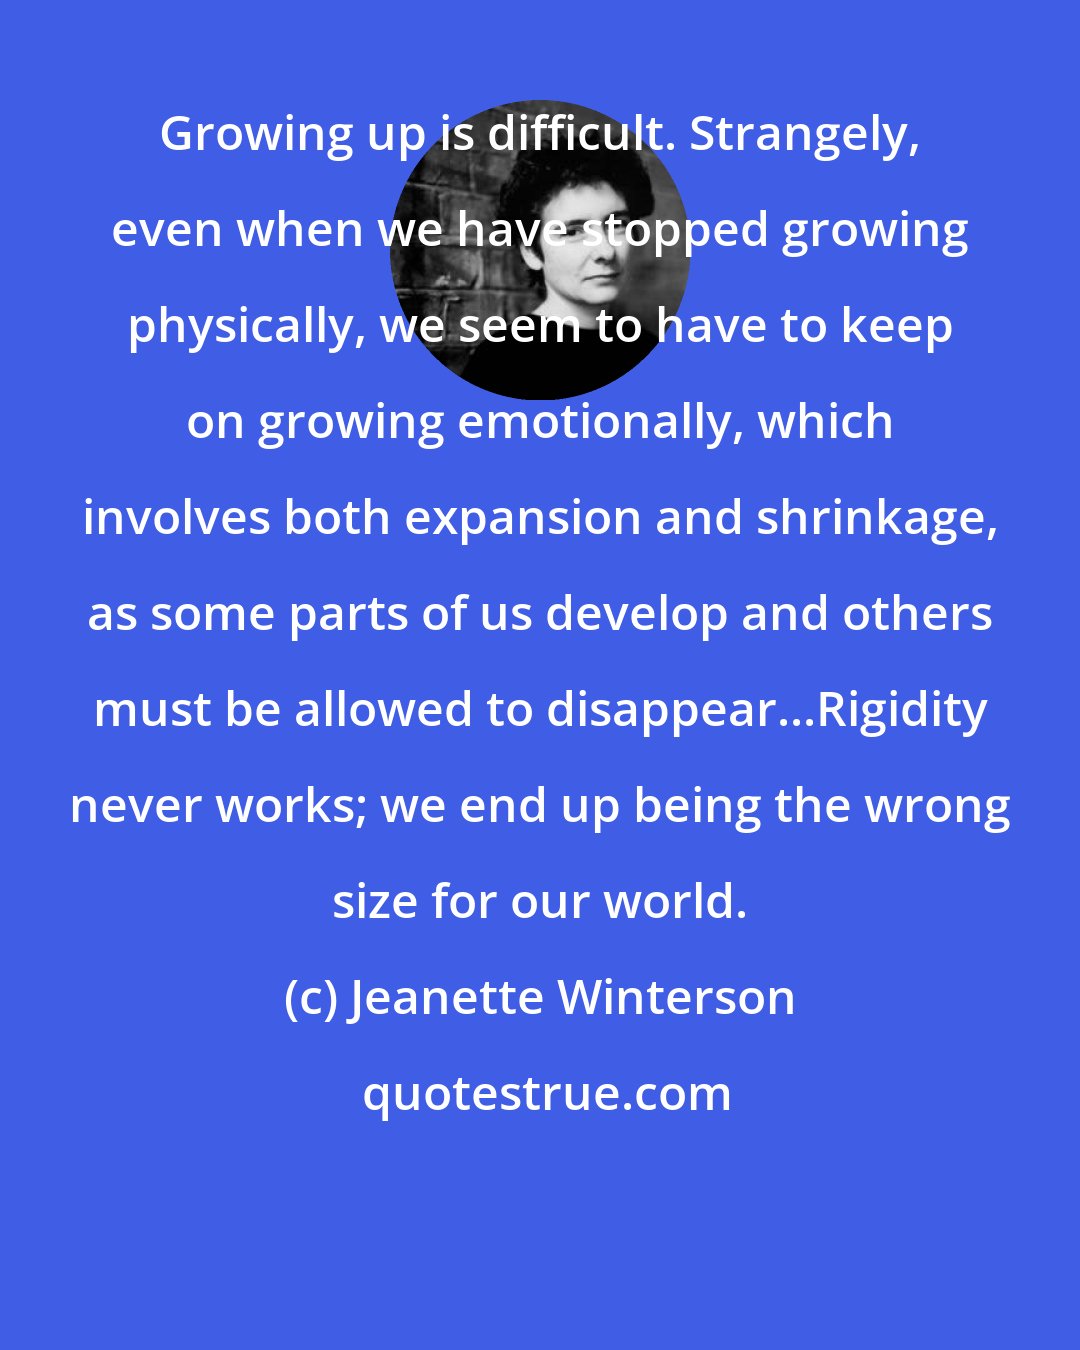 Jeanette Winterson: Growing up is difficult. Strangely, even when we have stopped growing physically, we seem to have to keep on growing emotionally, which involves both expansion and shrinkage, as some parts of us develop and others must be allowed to disappear...Rigidity never works; we end up being the wrong size for our world.